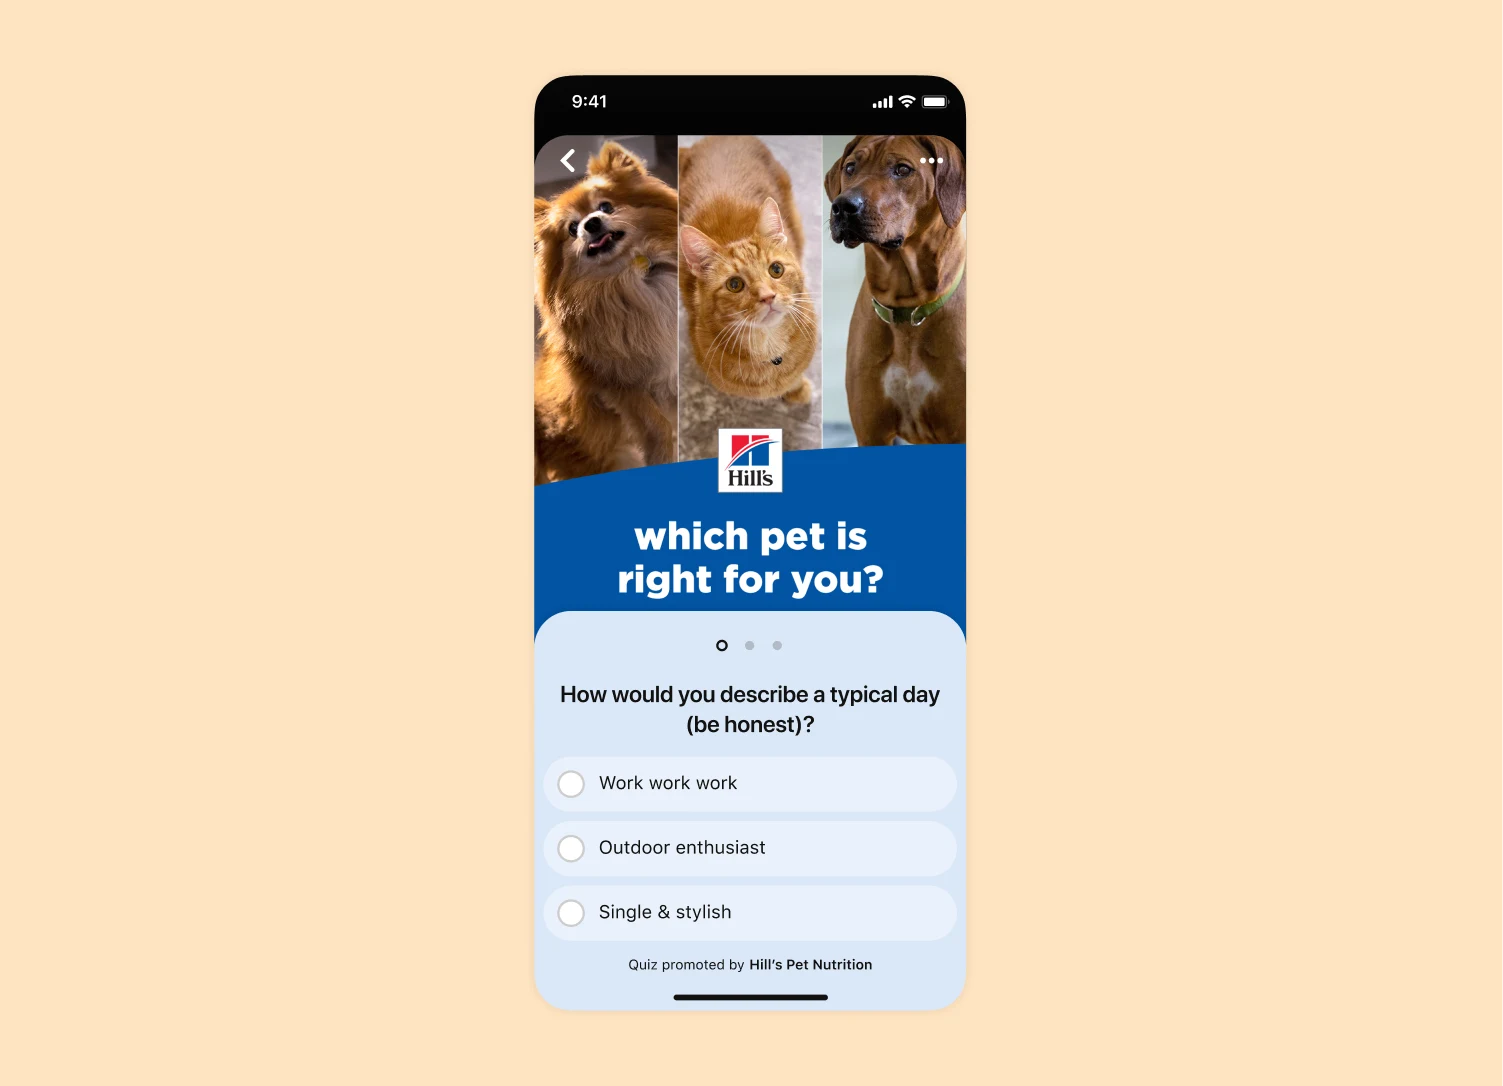 Mobile screen view of a Pinterest quiz ad for the Hill's Nutrition pet food brand.